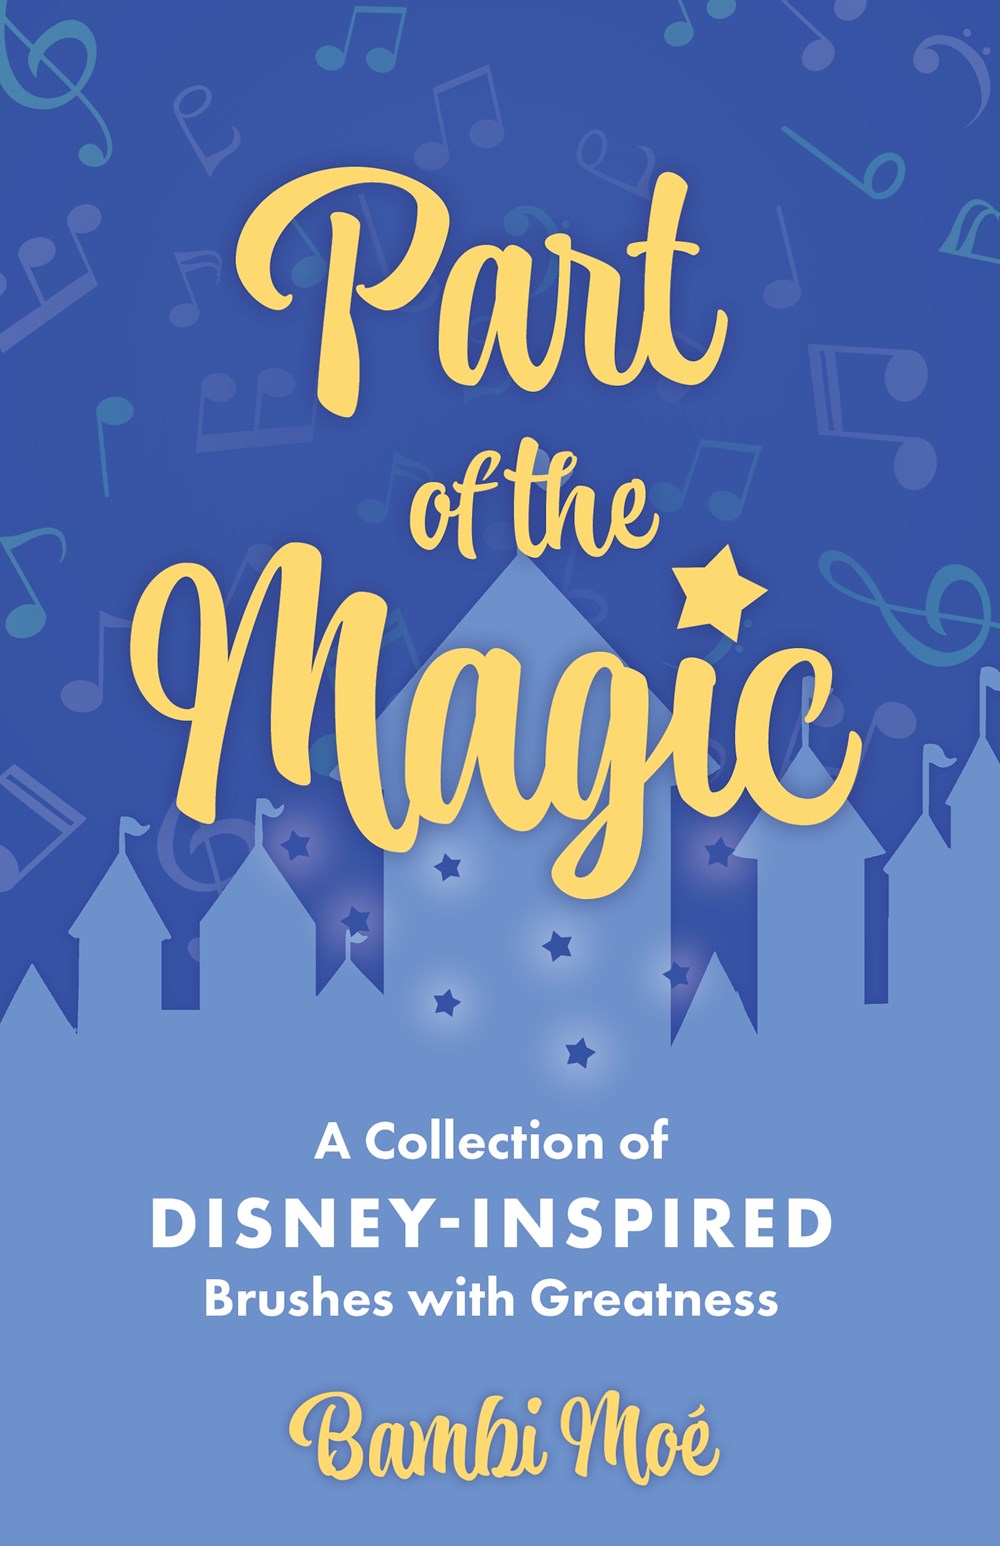 Part of the Magic: A Collection of Disney-Inspired Brushes with Greatness